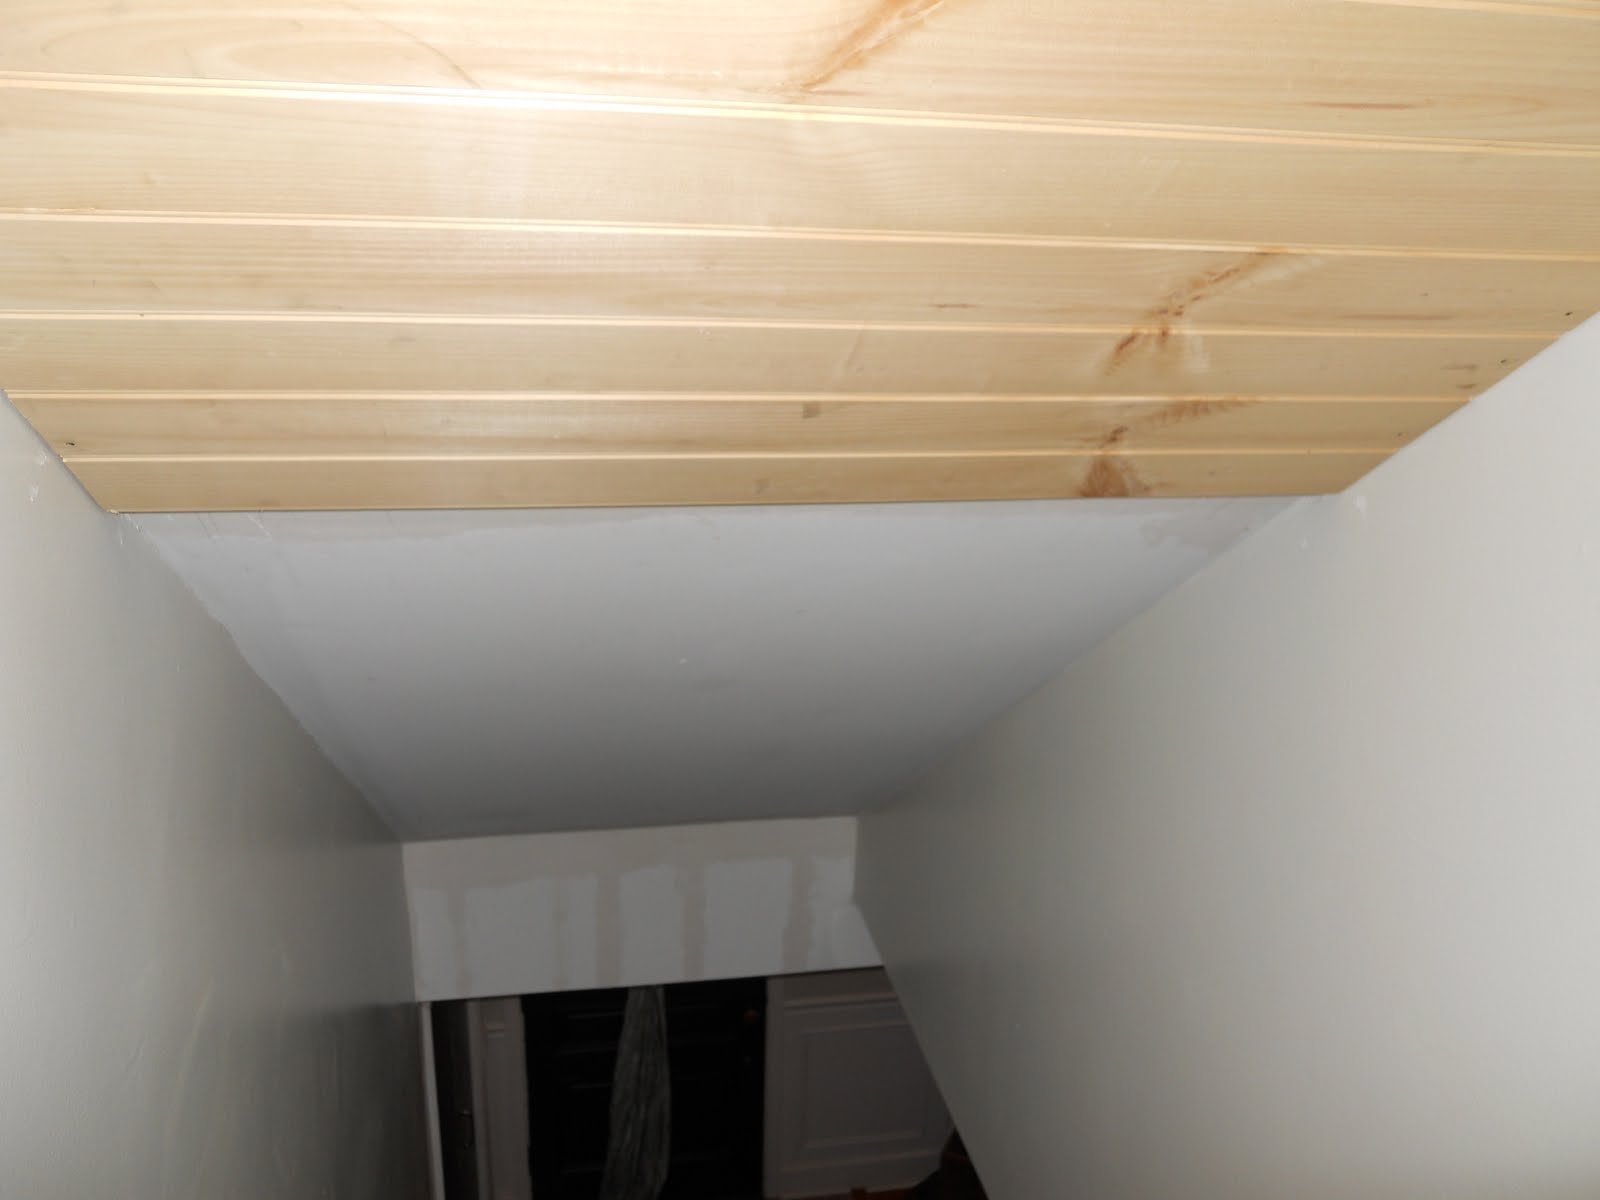 Cover Ceiling Tile With Drywall